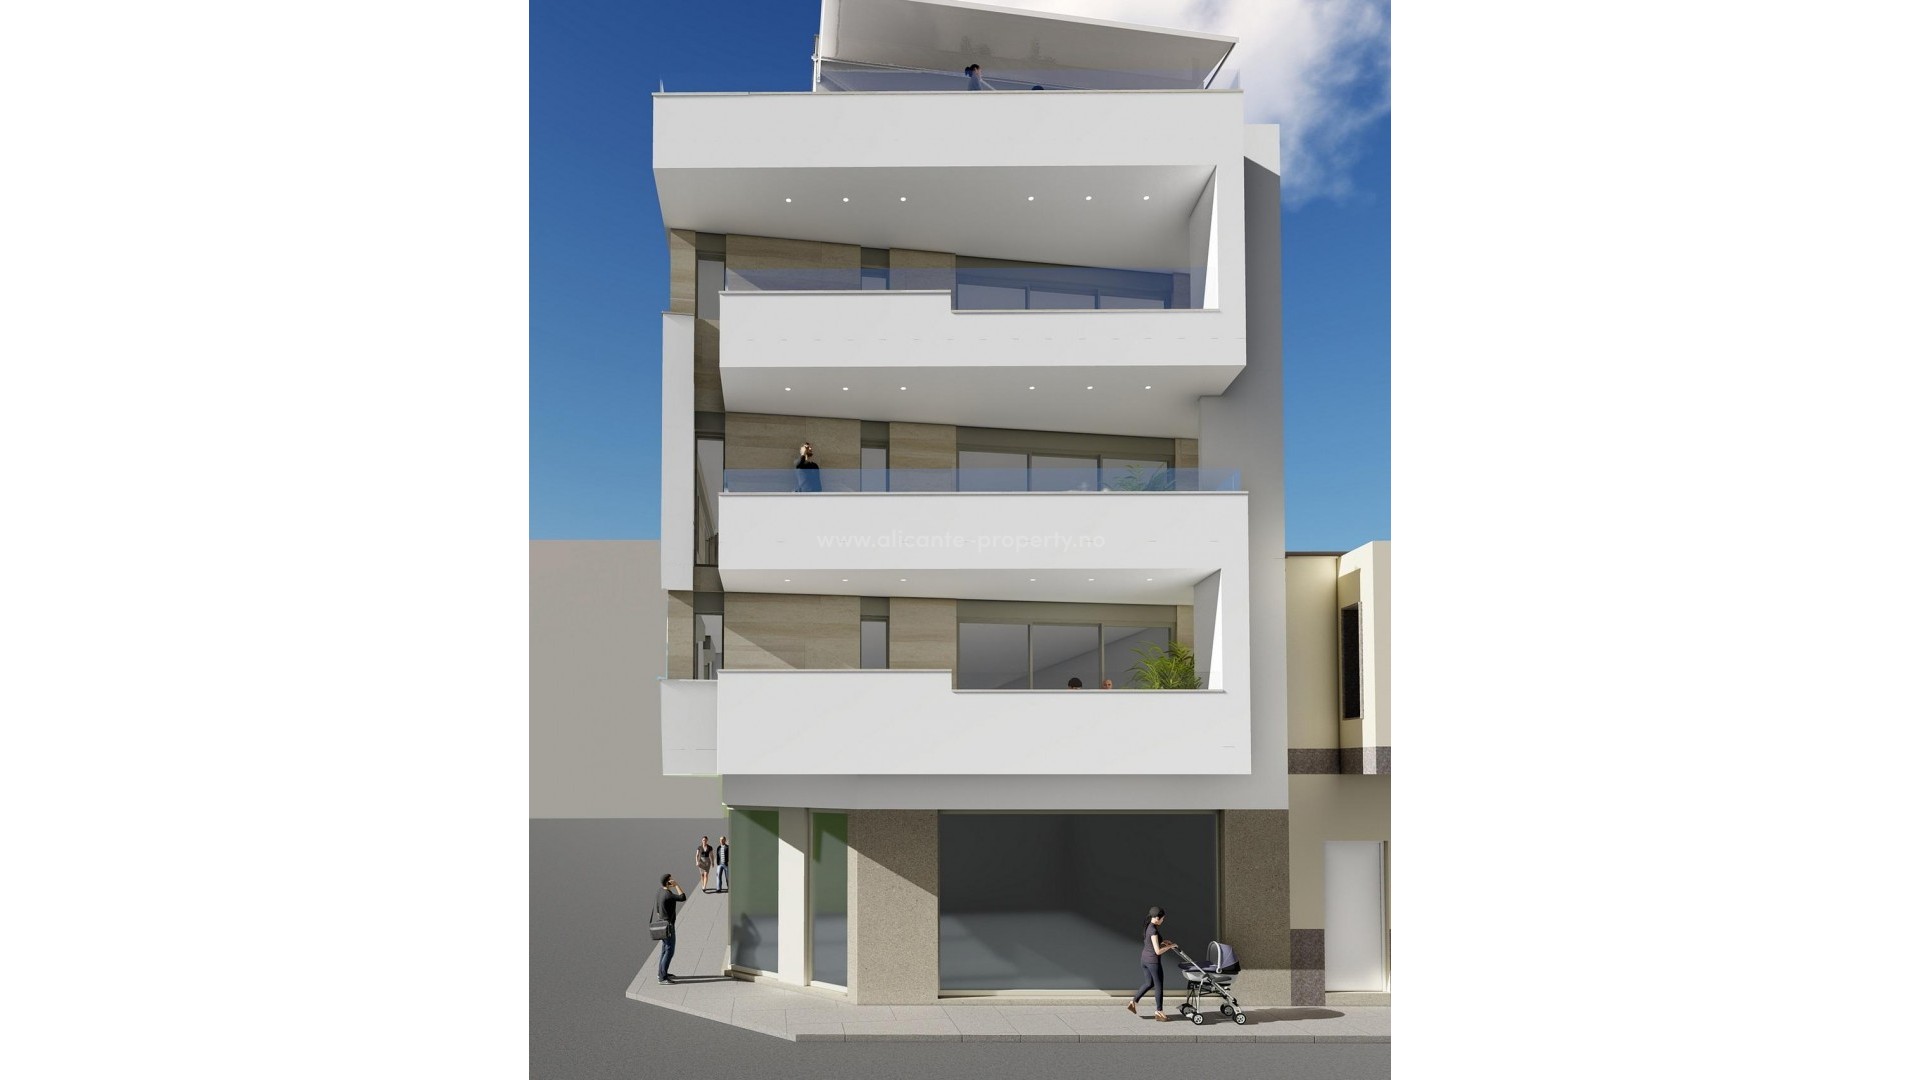 16 apartments on Los Locos beach in Torrevieja, 1/2/3 bedrooms, 1/2 bathrooms, all with terraces, shared solarium, hot tub, chillout area and sauna.